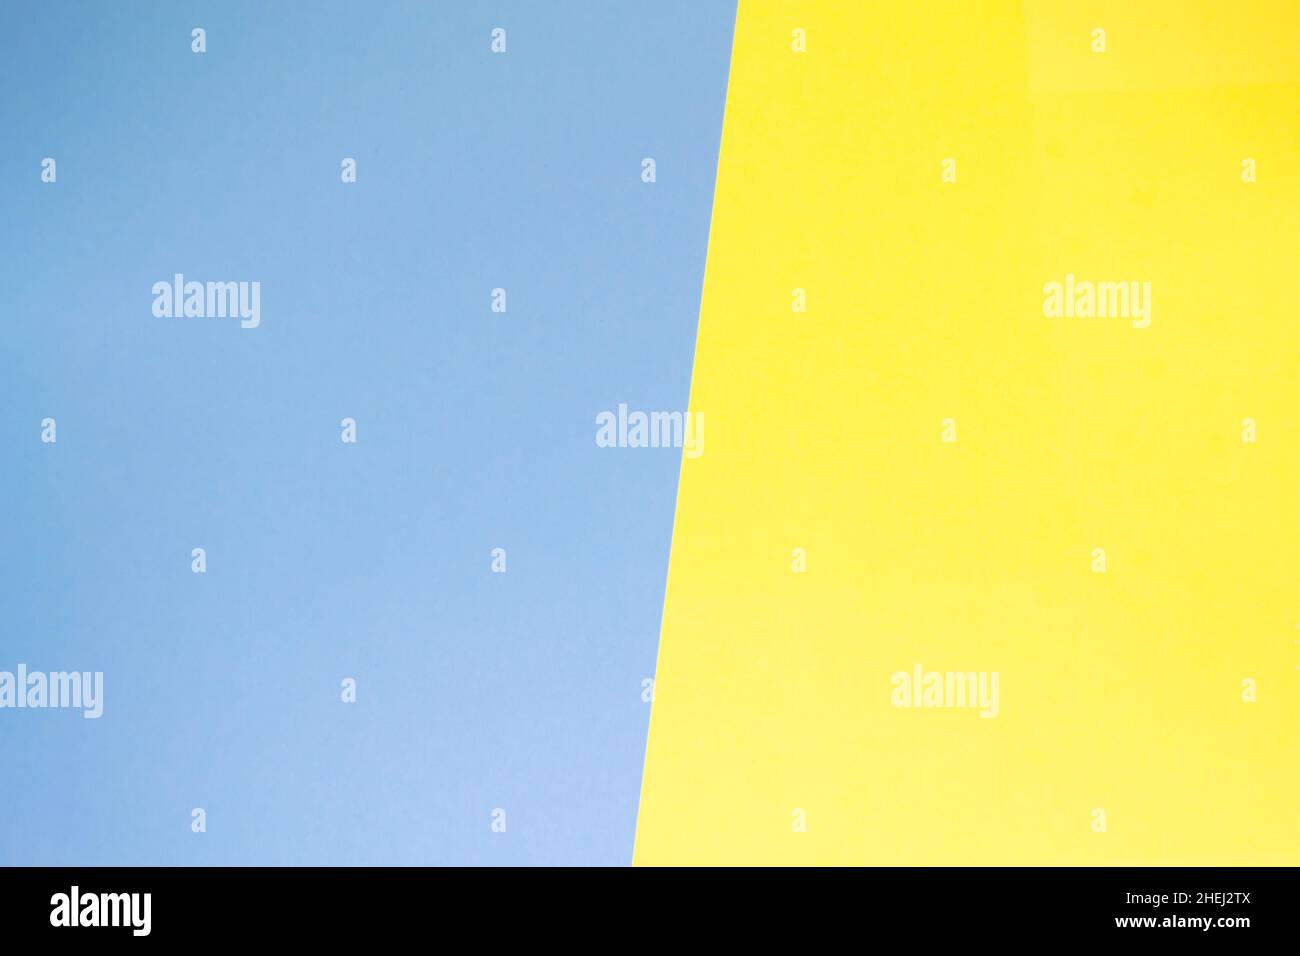 Paper background in blue and yellow pastel colors. Stock Photo